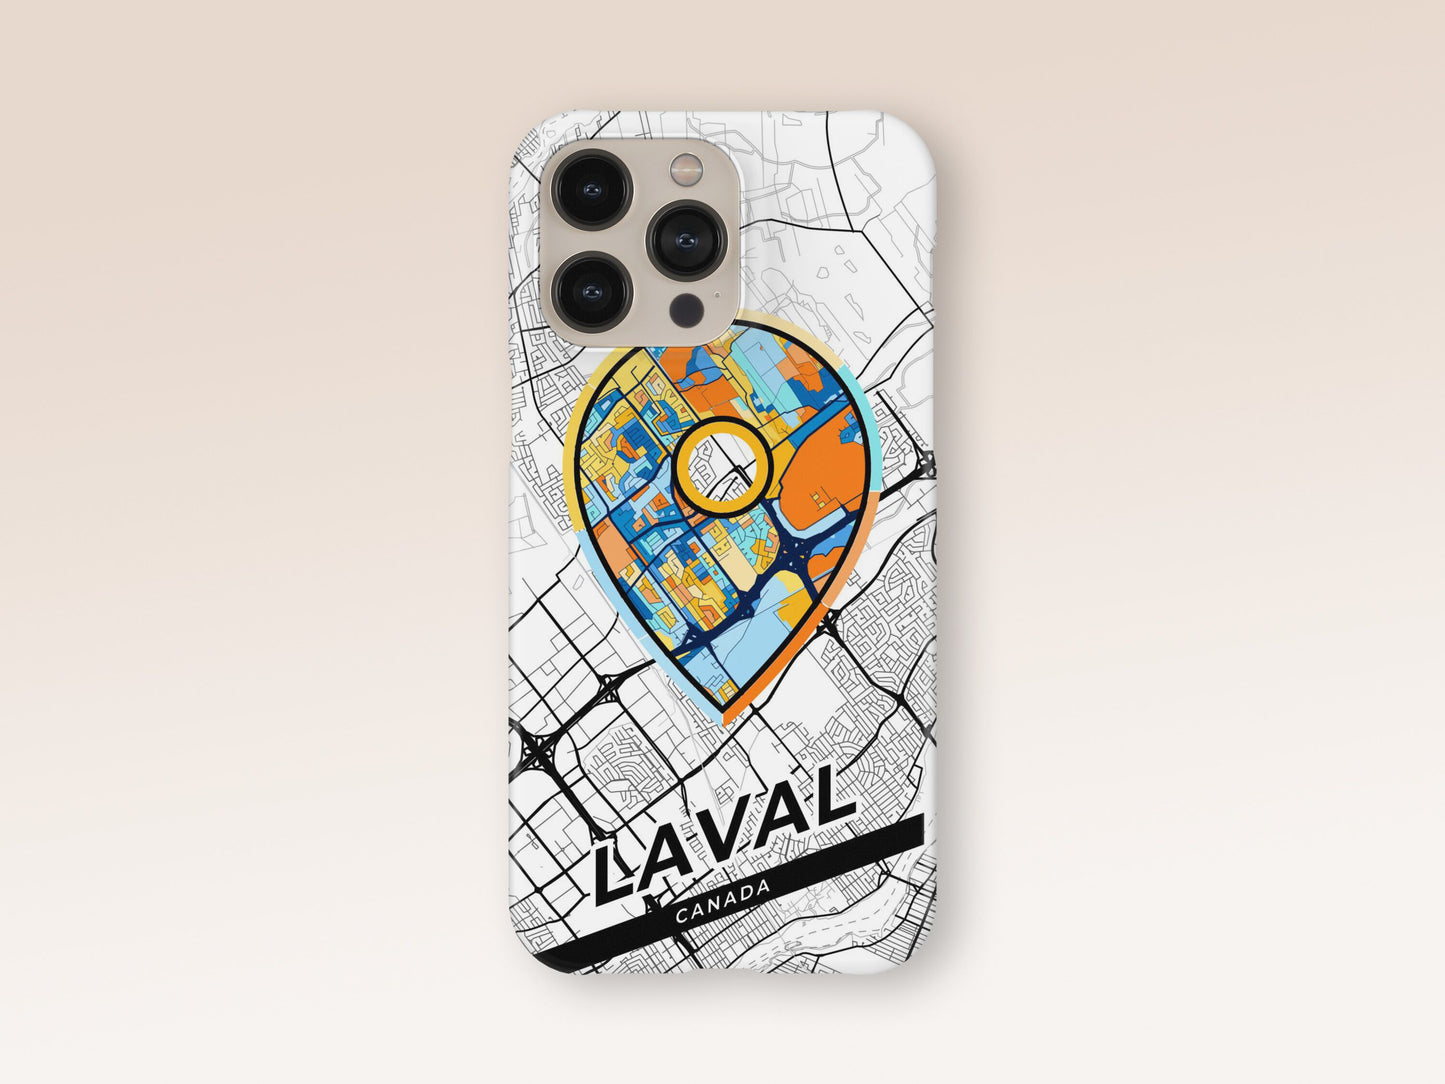 Laval Canada slim phone case with colorful icon. Birthday, wedding or housewarming gift. Couple match cases. 1